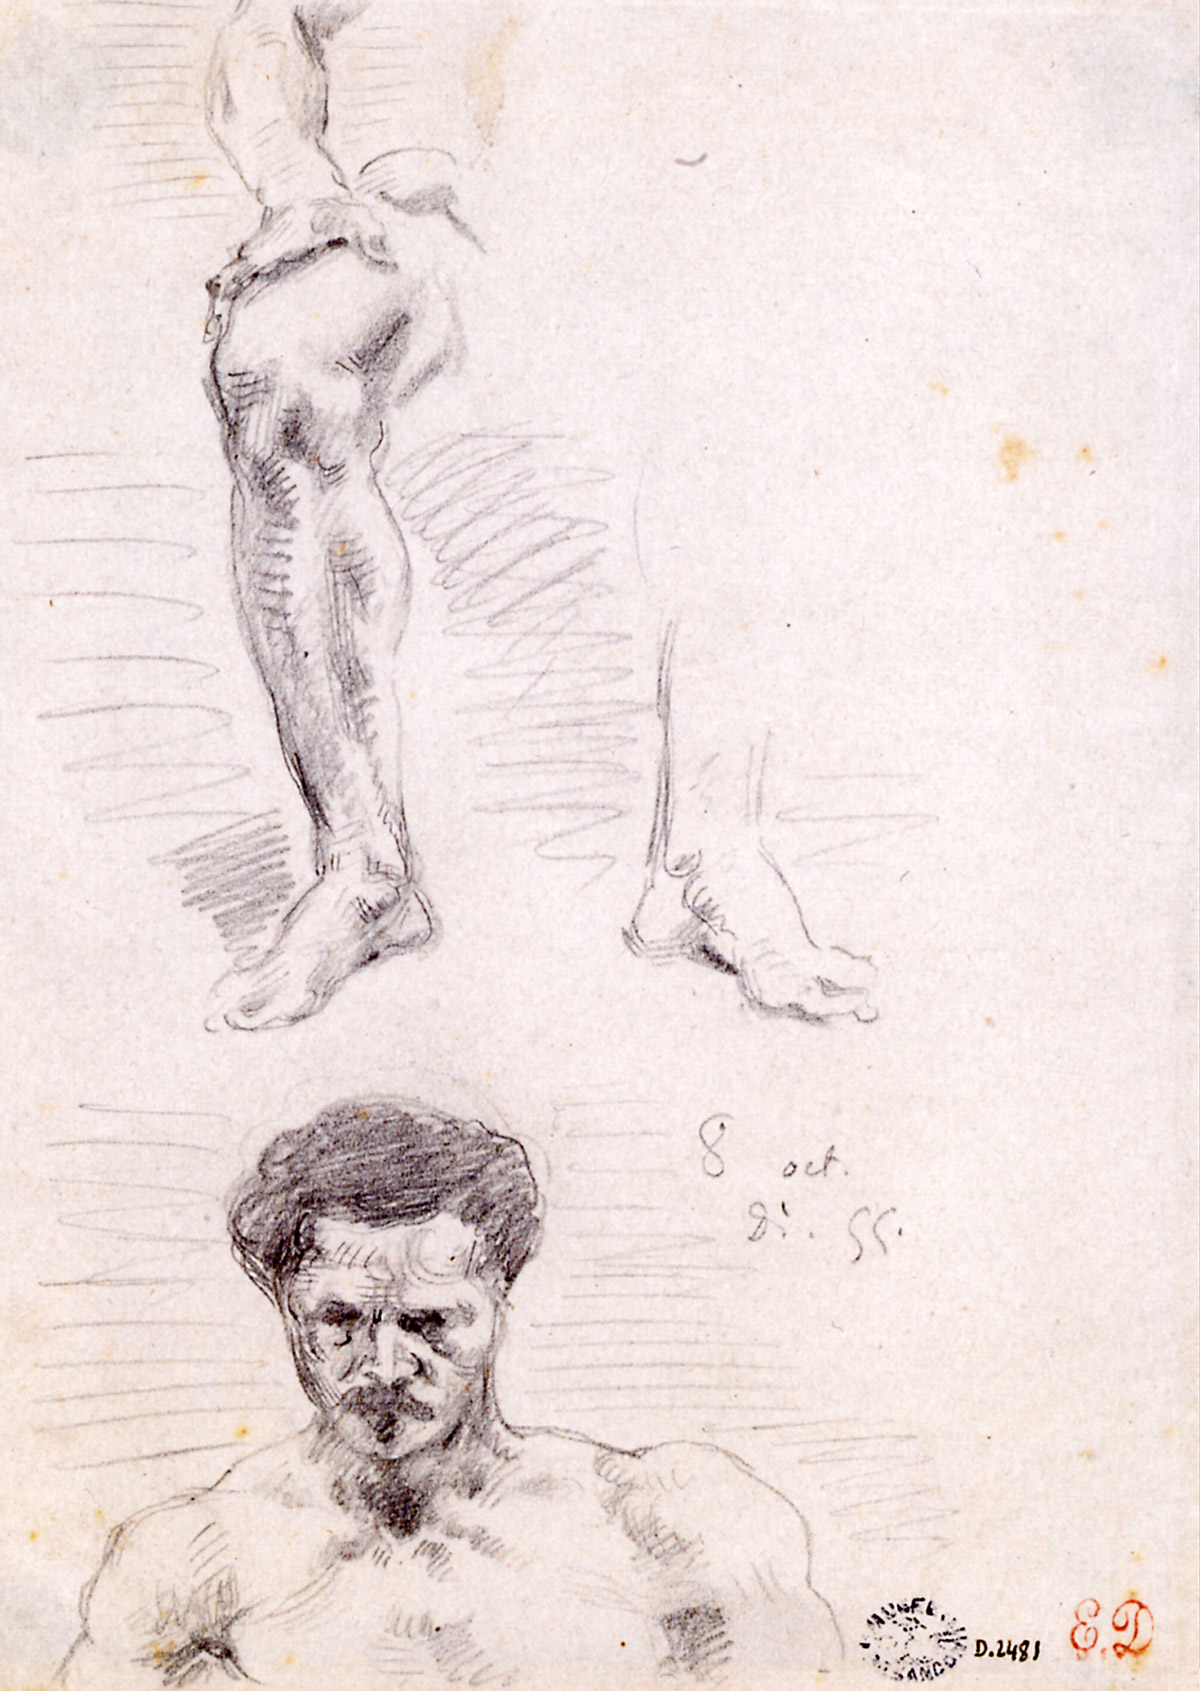 Delacroix’s studies of a man’s leg and head from Eugène Durieu‘s photographs, dated 8th of October eighteen fifty-five.